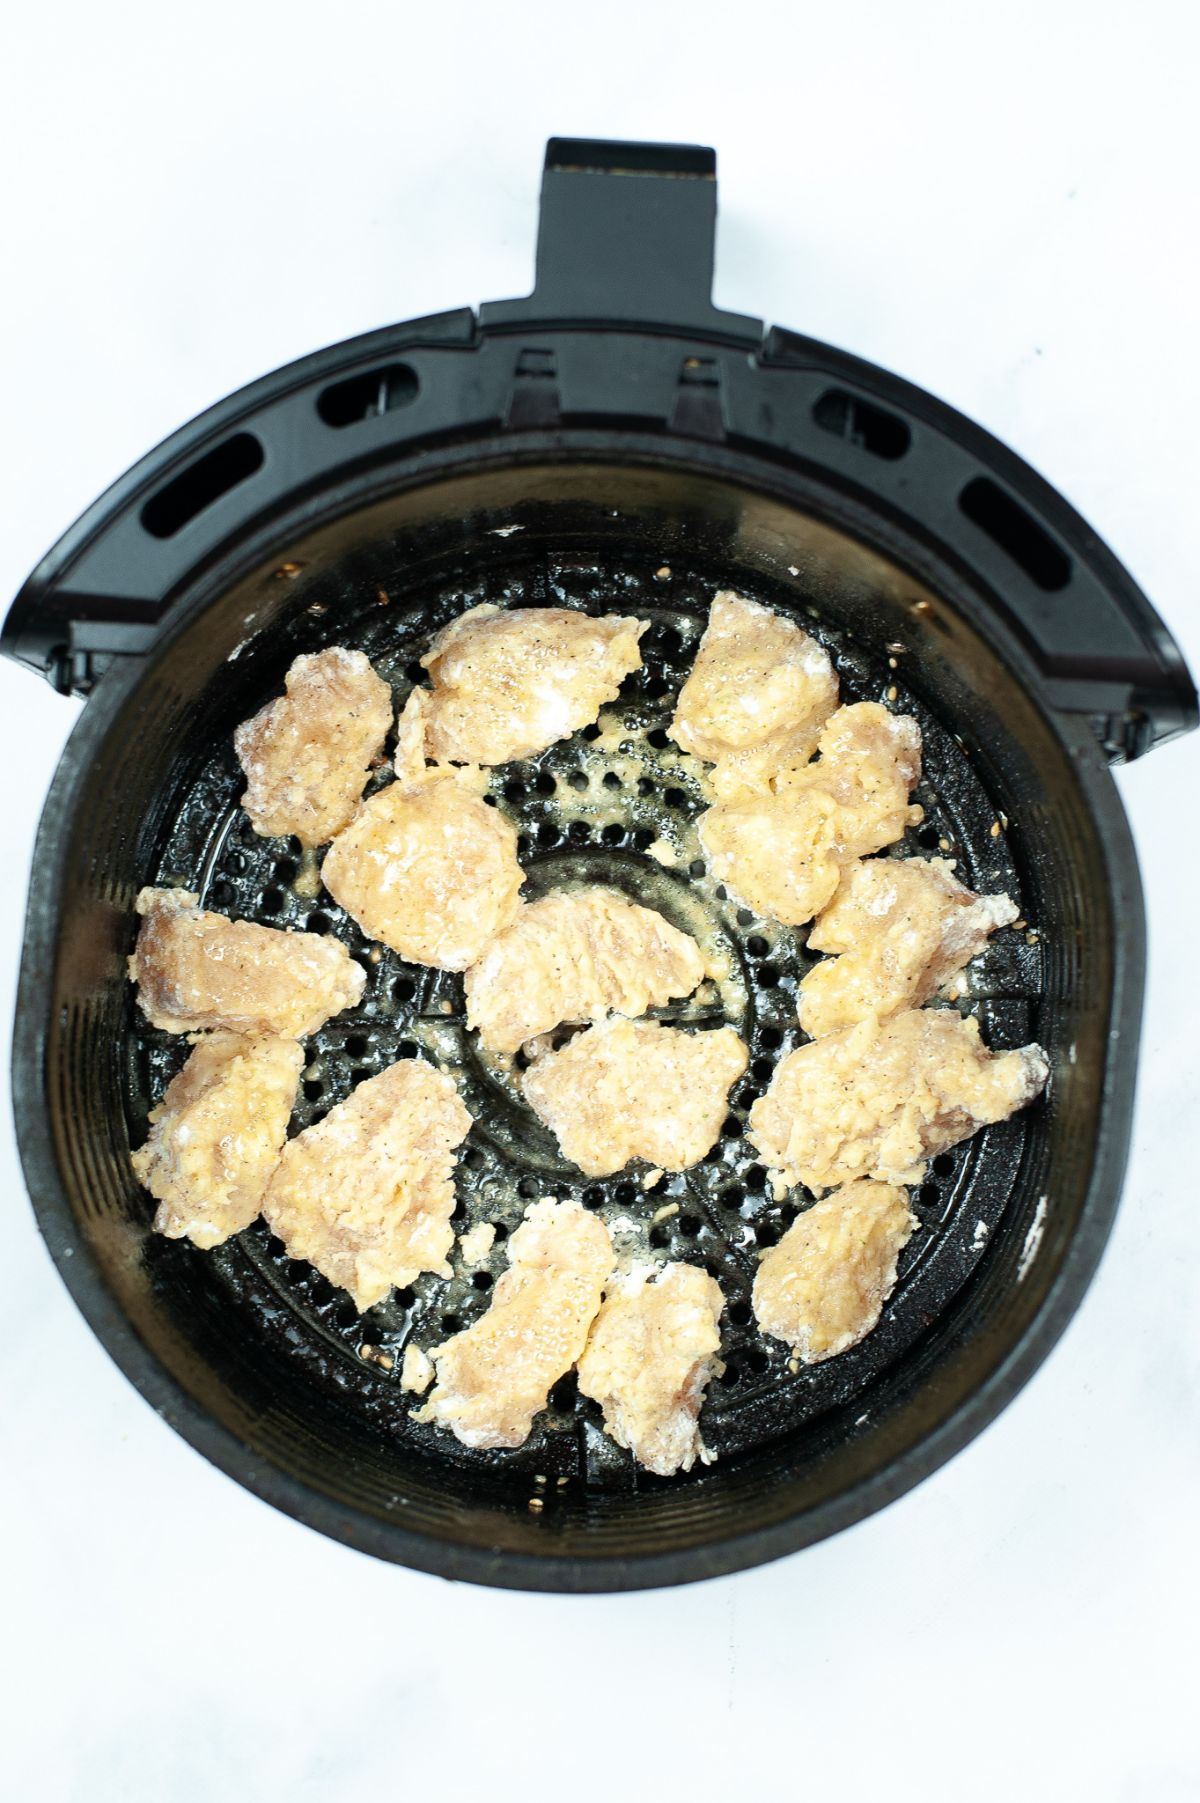 coated chicken pieces being cooked in an air fryer